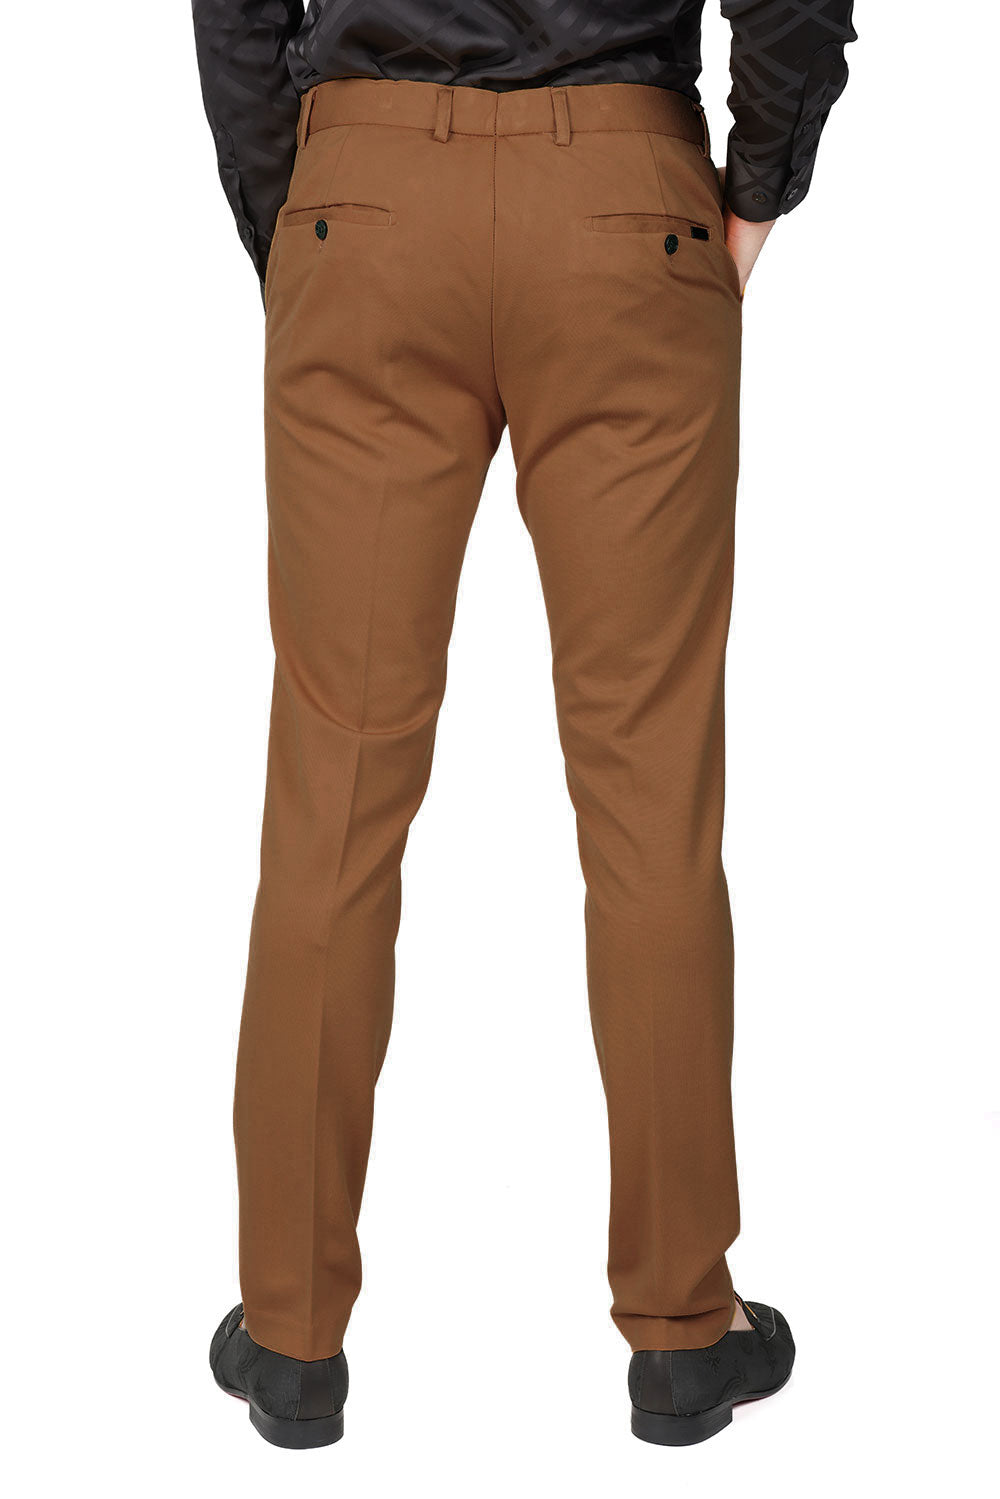 Barabas Men's Solid Color Basic Essential Chino Dress Pants CP4007 Camel